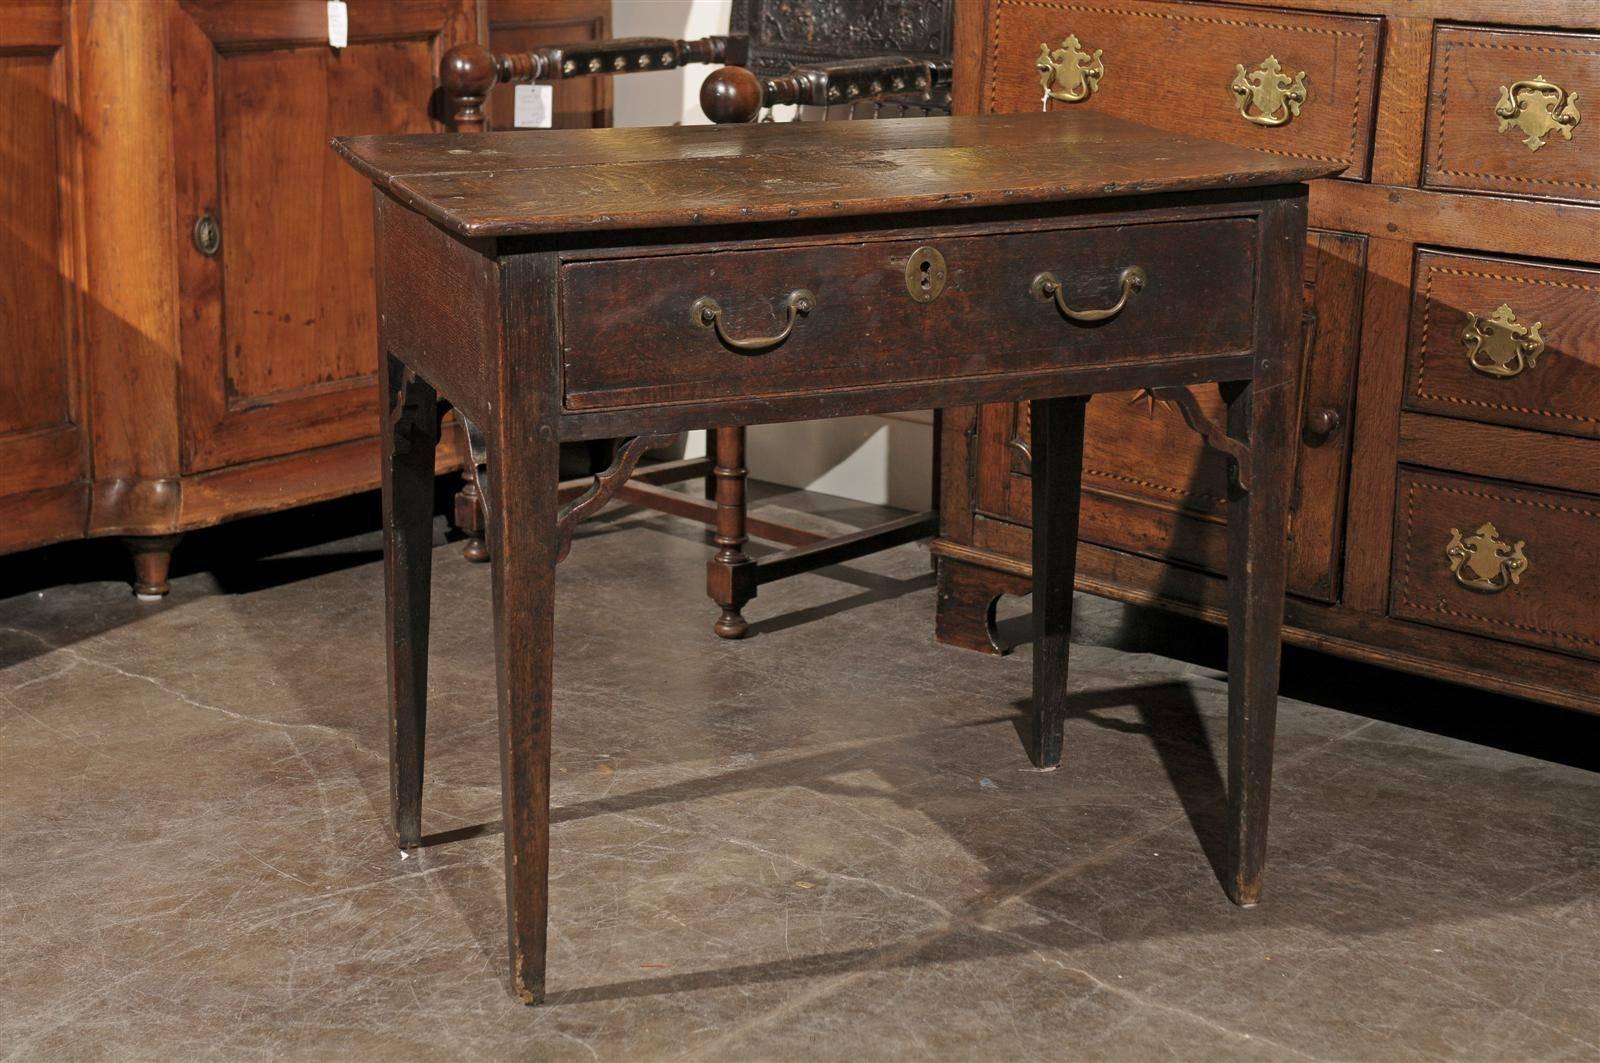 A period Sheraton oak side table with drawer from England from the 1780s. This stylish English oak side table features a rectangular top over a simple apron, adorned with a single drawer and two elegant bail handles and a central escutcheon. It